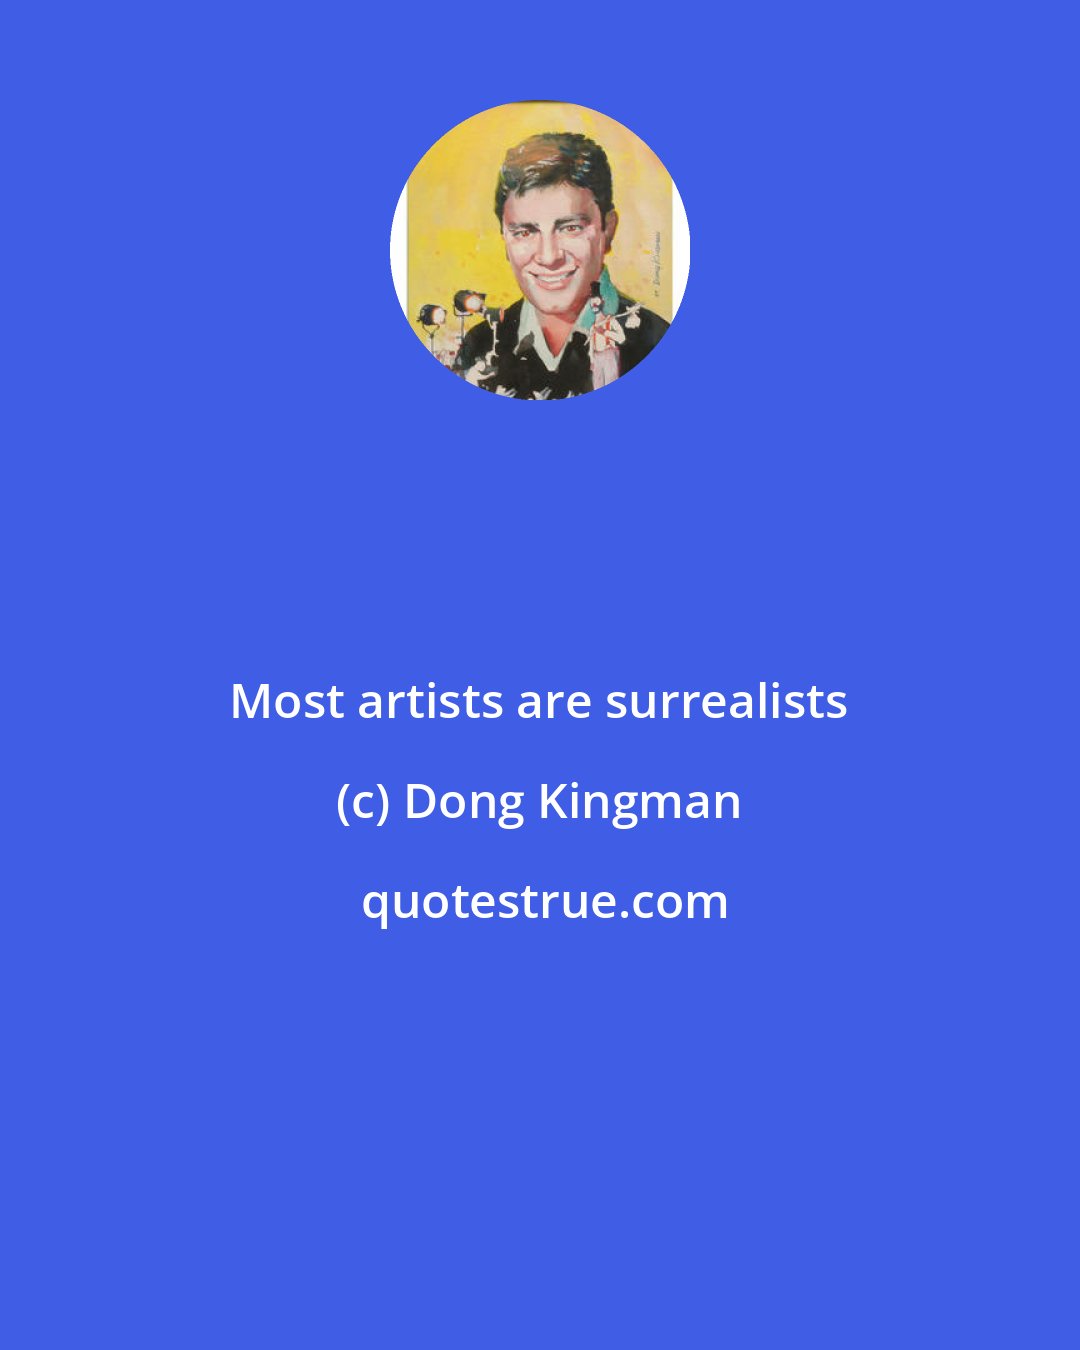 Dong Kingman: Most artists are surrealists